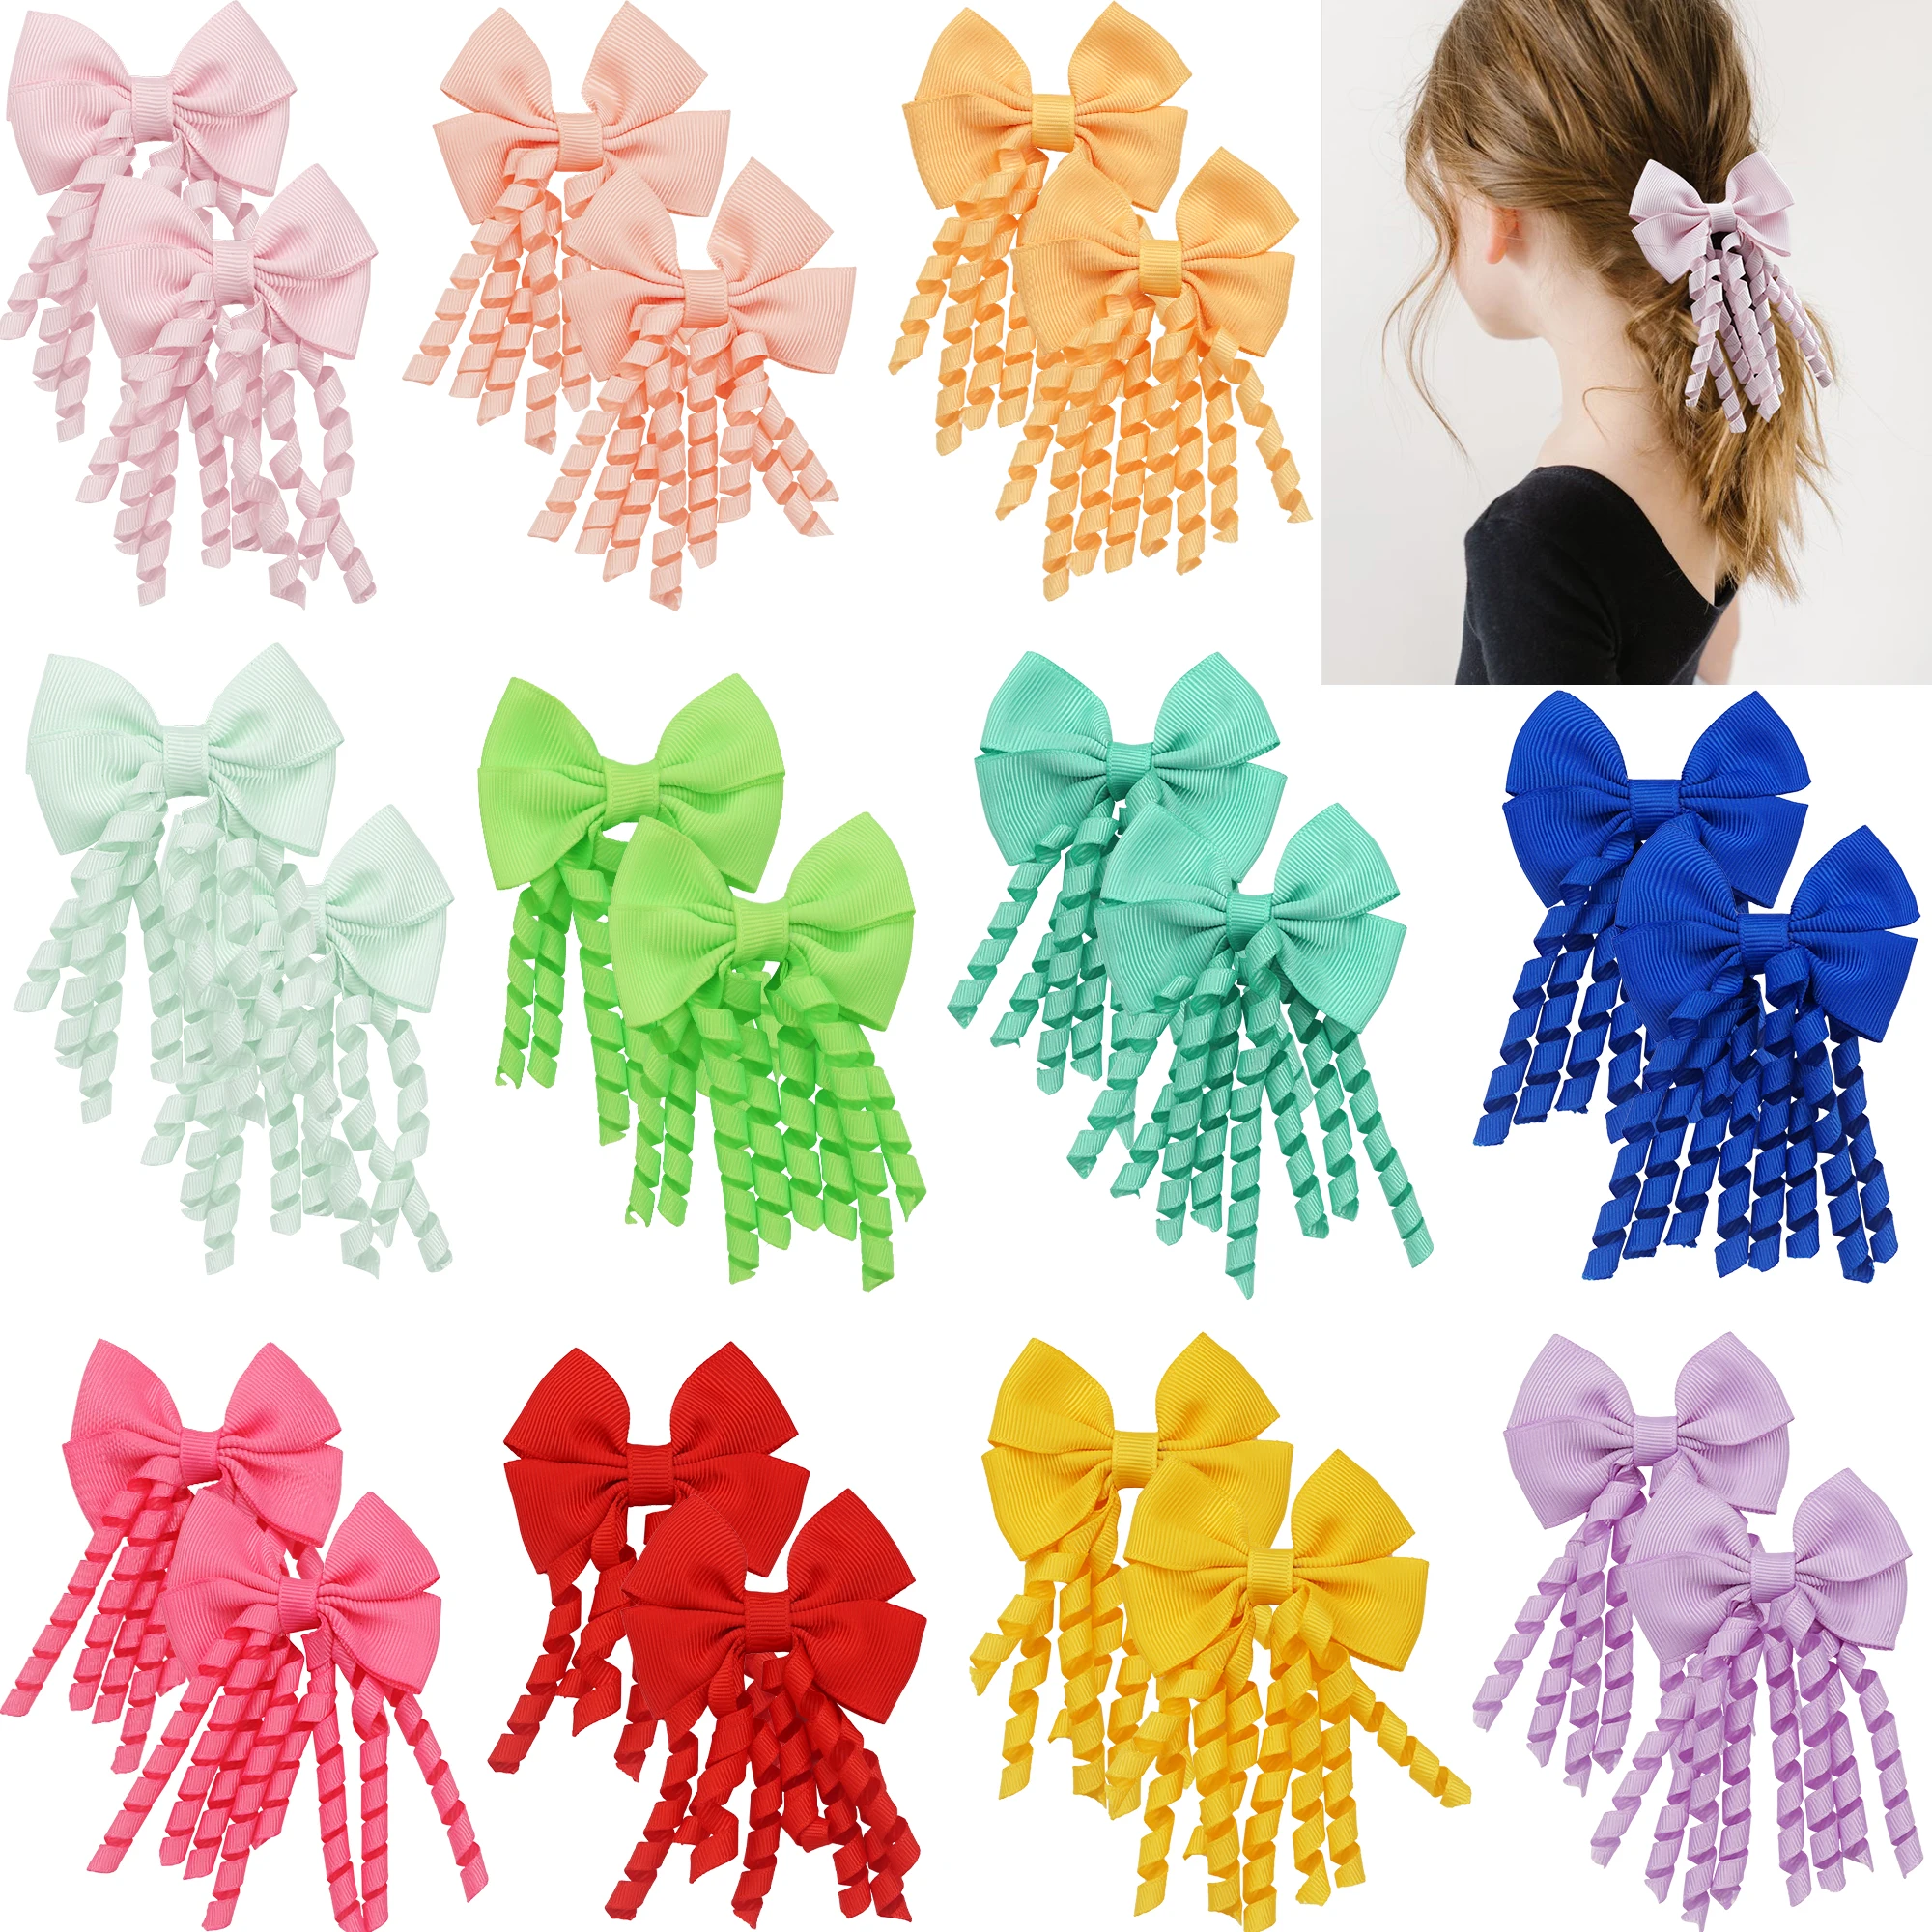 Baby Girls Hair Ties with Bows 2.7 Inch Grosgrain Ribbon Curly Korker Hair Bows Elastic Hair Bands Ponytail Holders for Tod